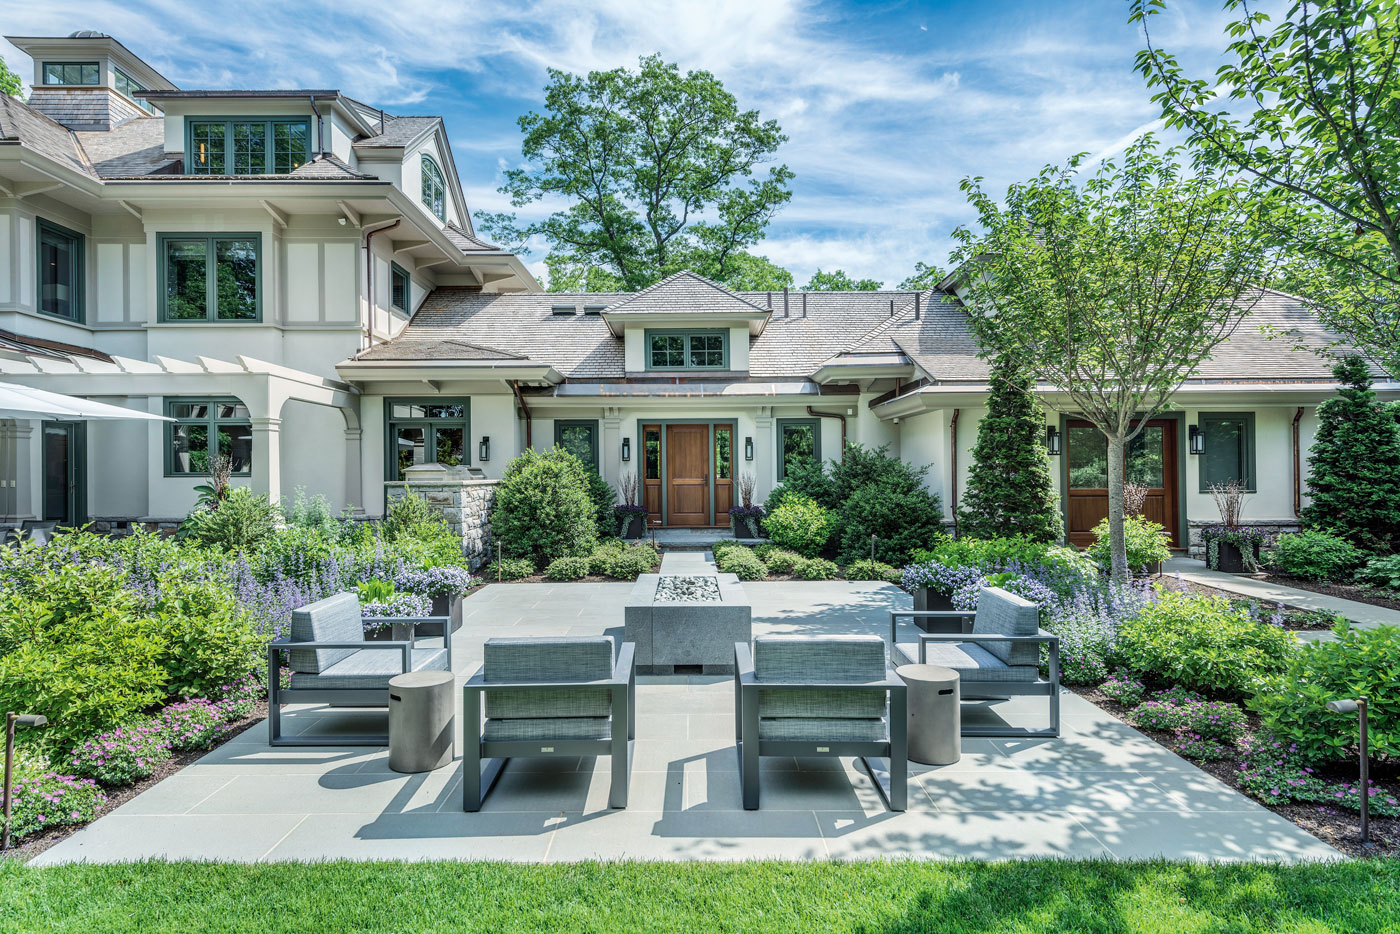 Custom patio for outdoor living in a high-end Boston home designed by Morehouse MacDonald and Associates and built by Sanford Custom Builders, Inc.